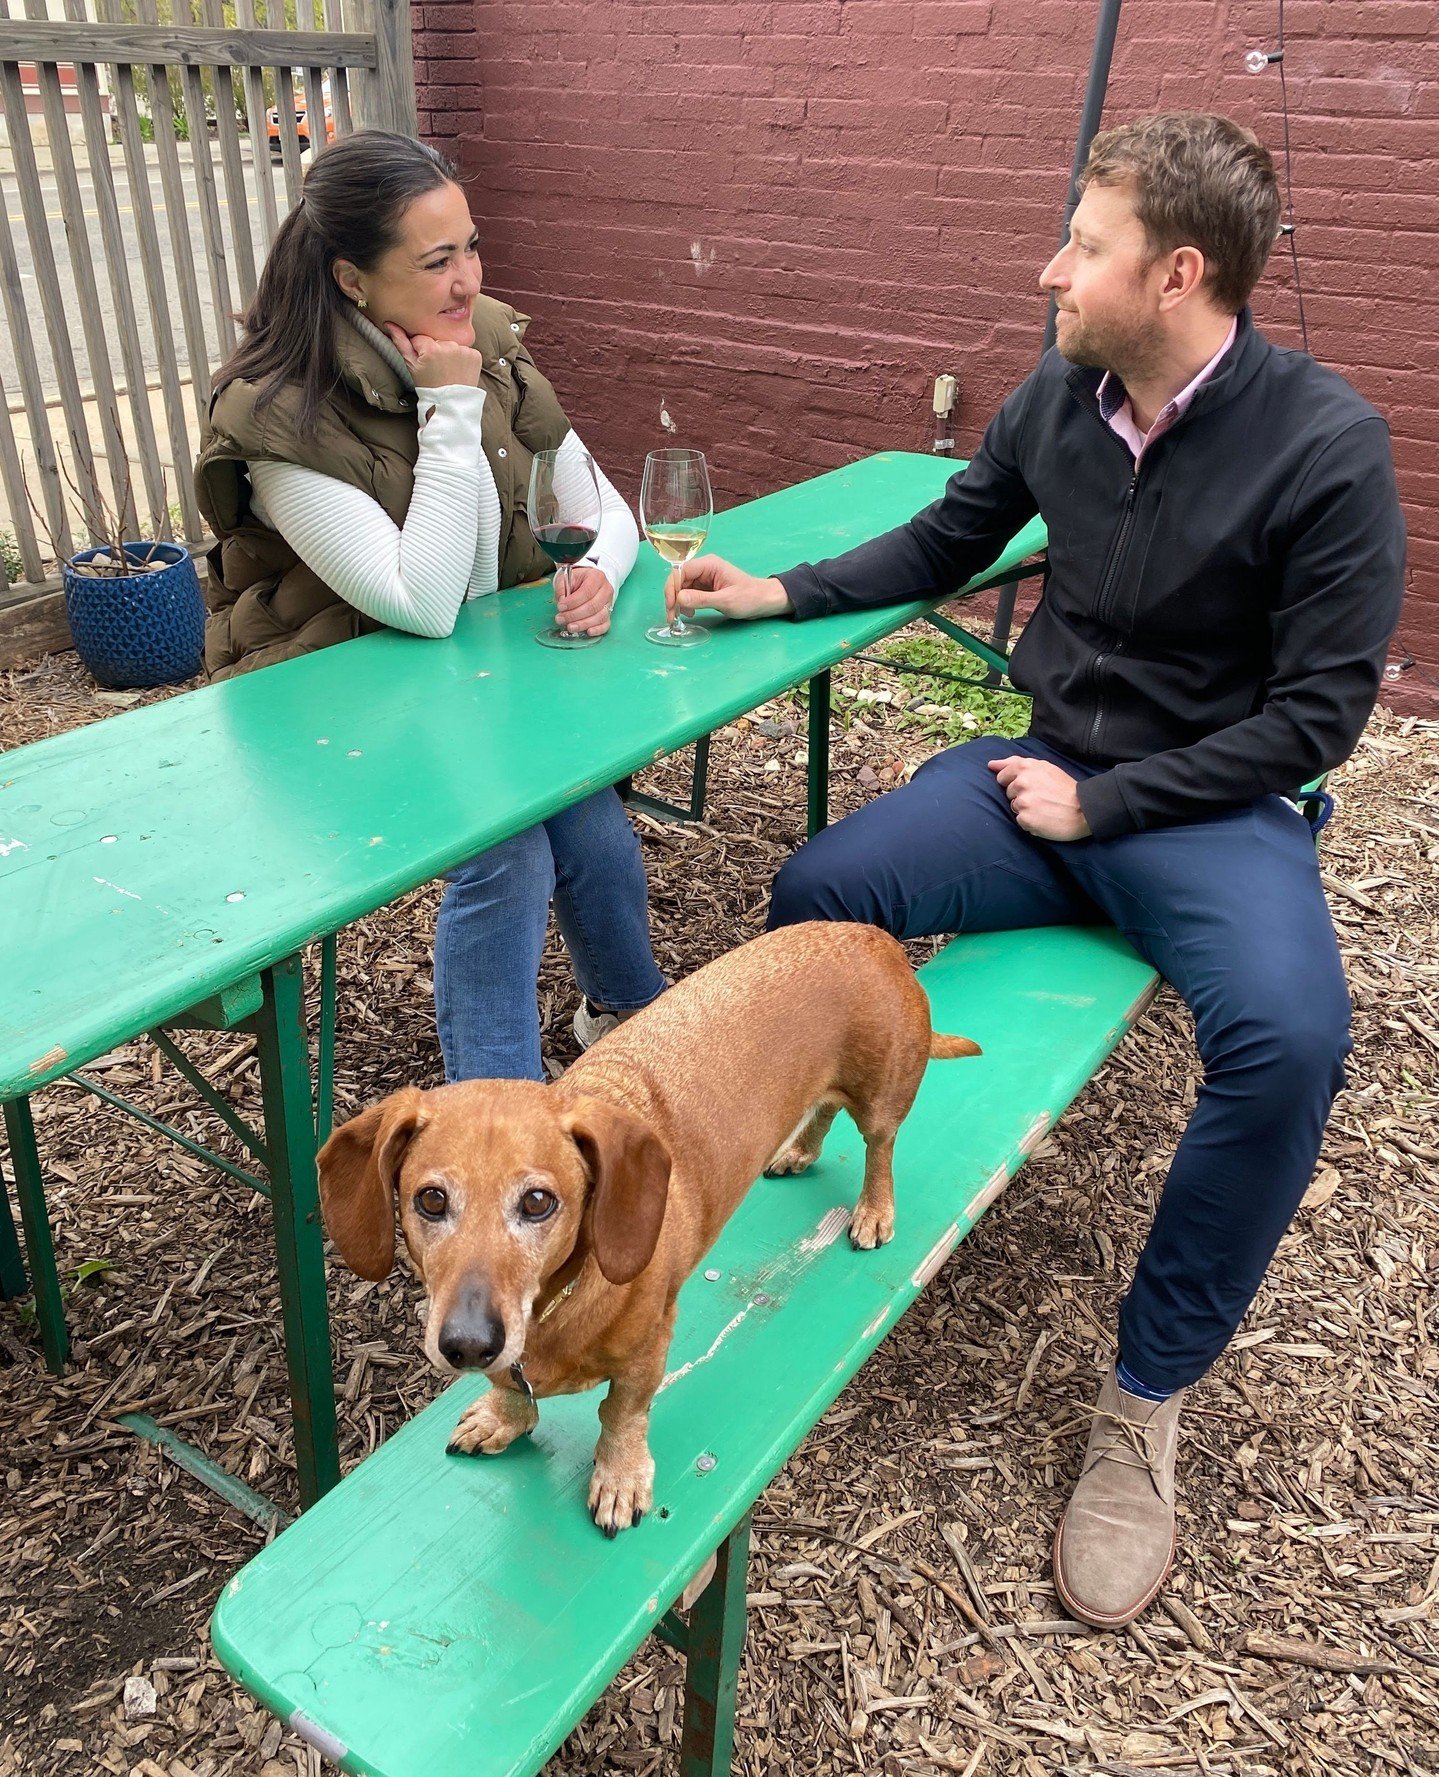 Date night is even better when the dog gets to come along! Come take a walk around the neighborhood, and stop by Table Wine for a glass or two🍷